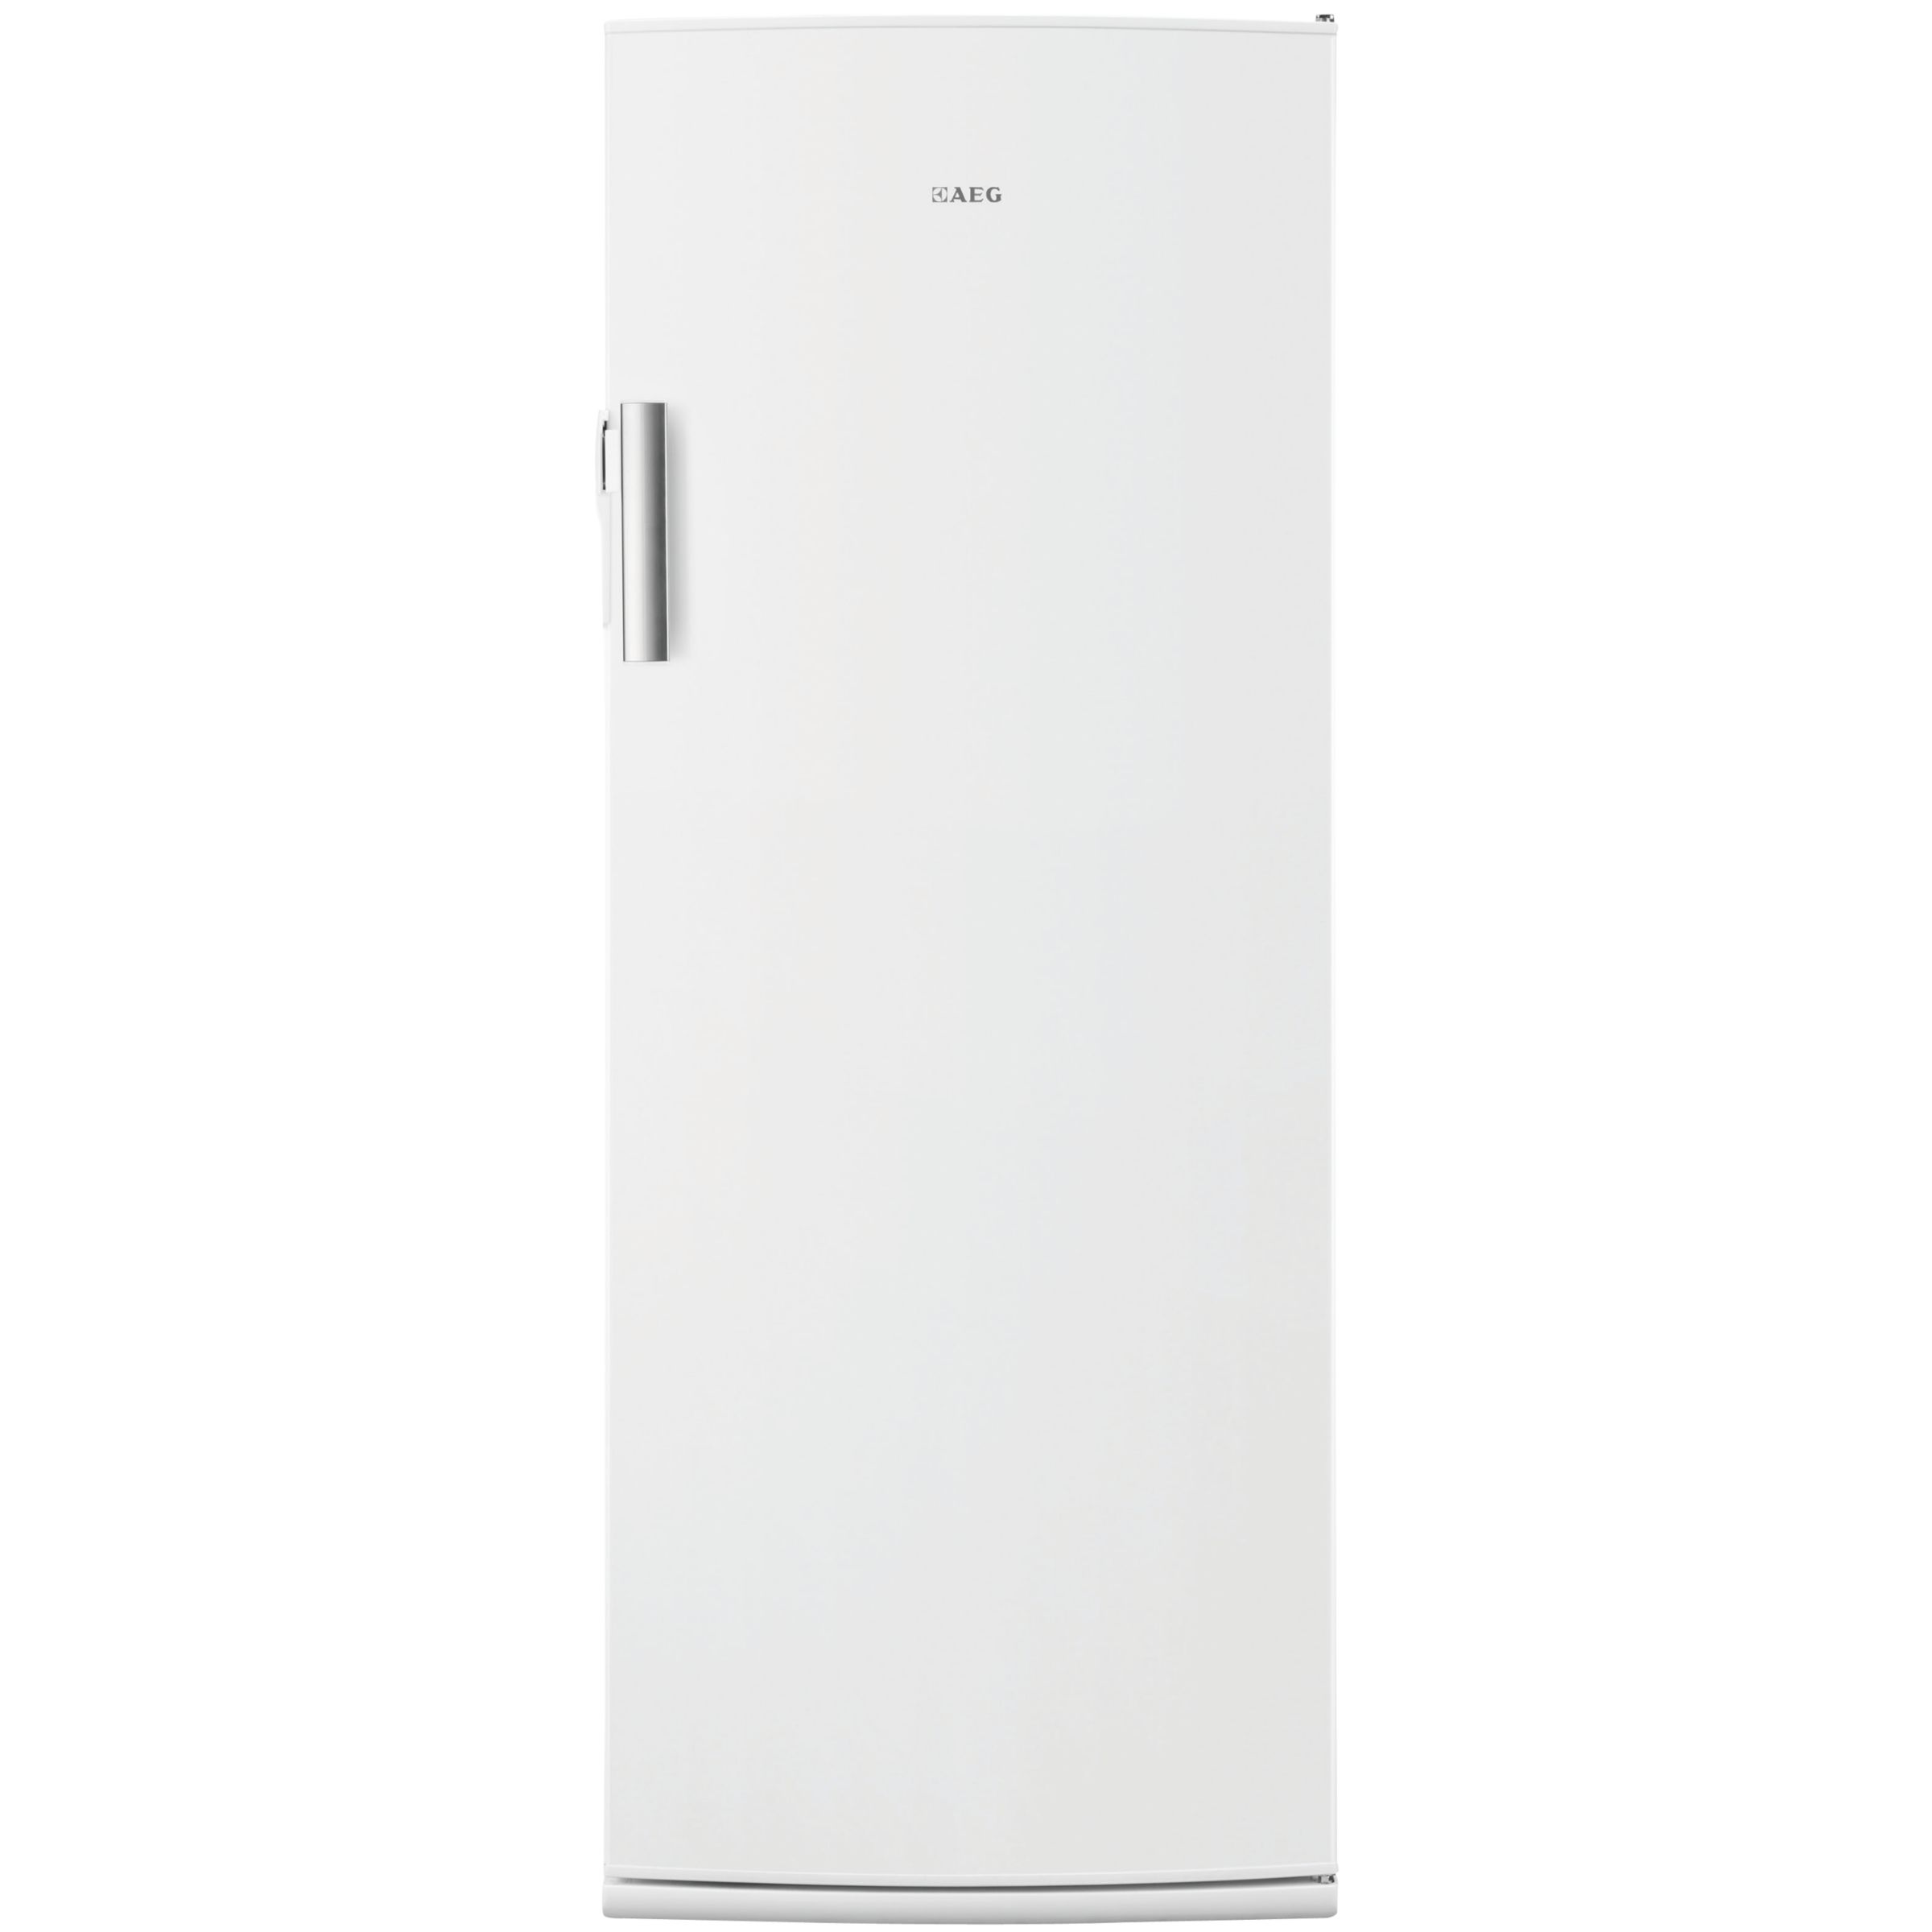 AEG A72020GN Tall Freezer, A++ Energy Rating, 60cm Wide